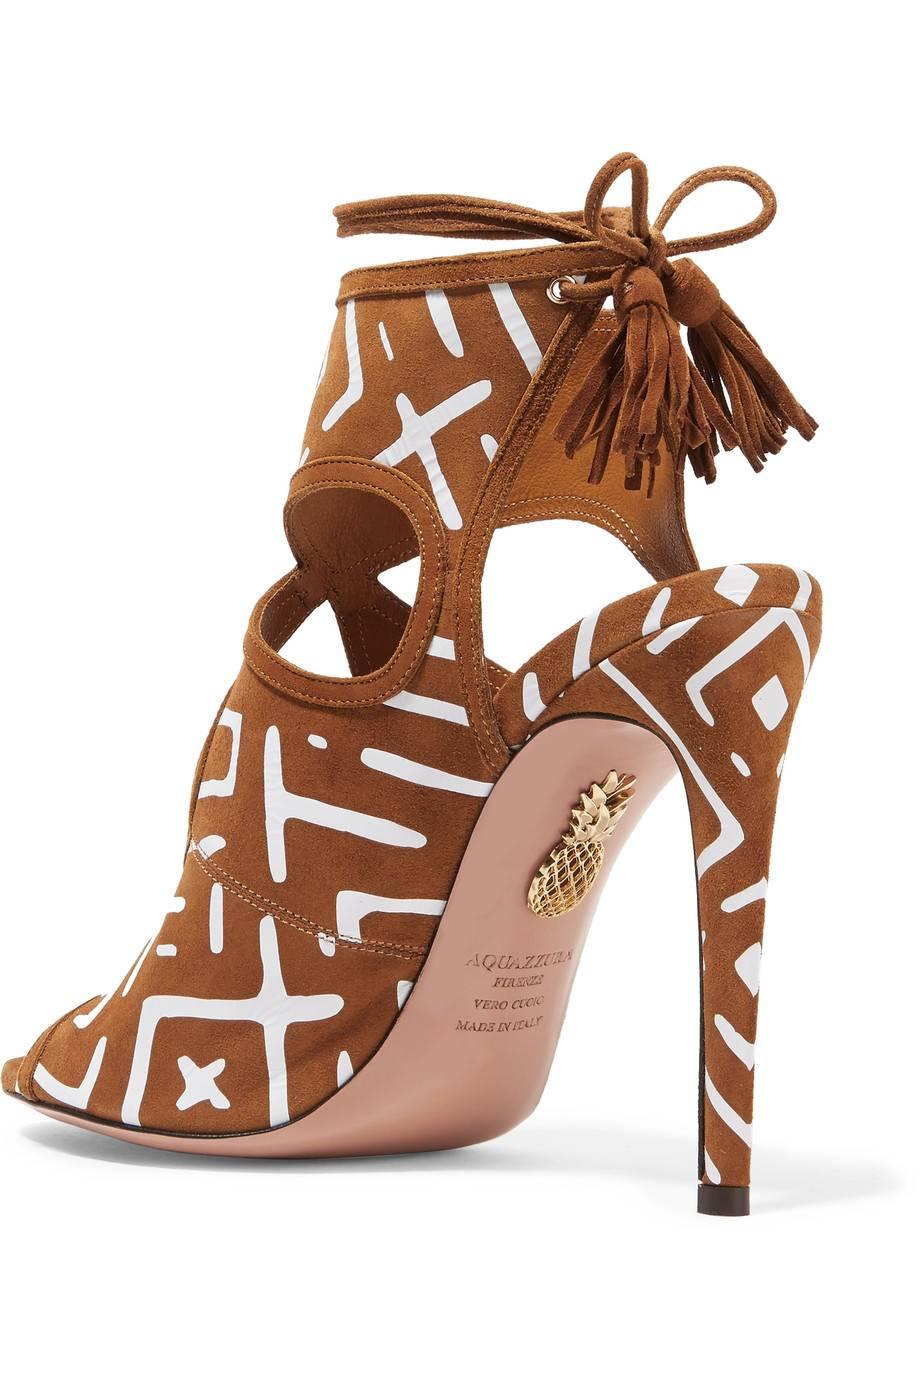 Aquazzura New Cognac Tribal Cashmere Suede Cut Out Lace Up Sandals Heels in Box In New Condition In Chicago, IL